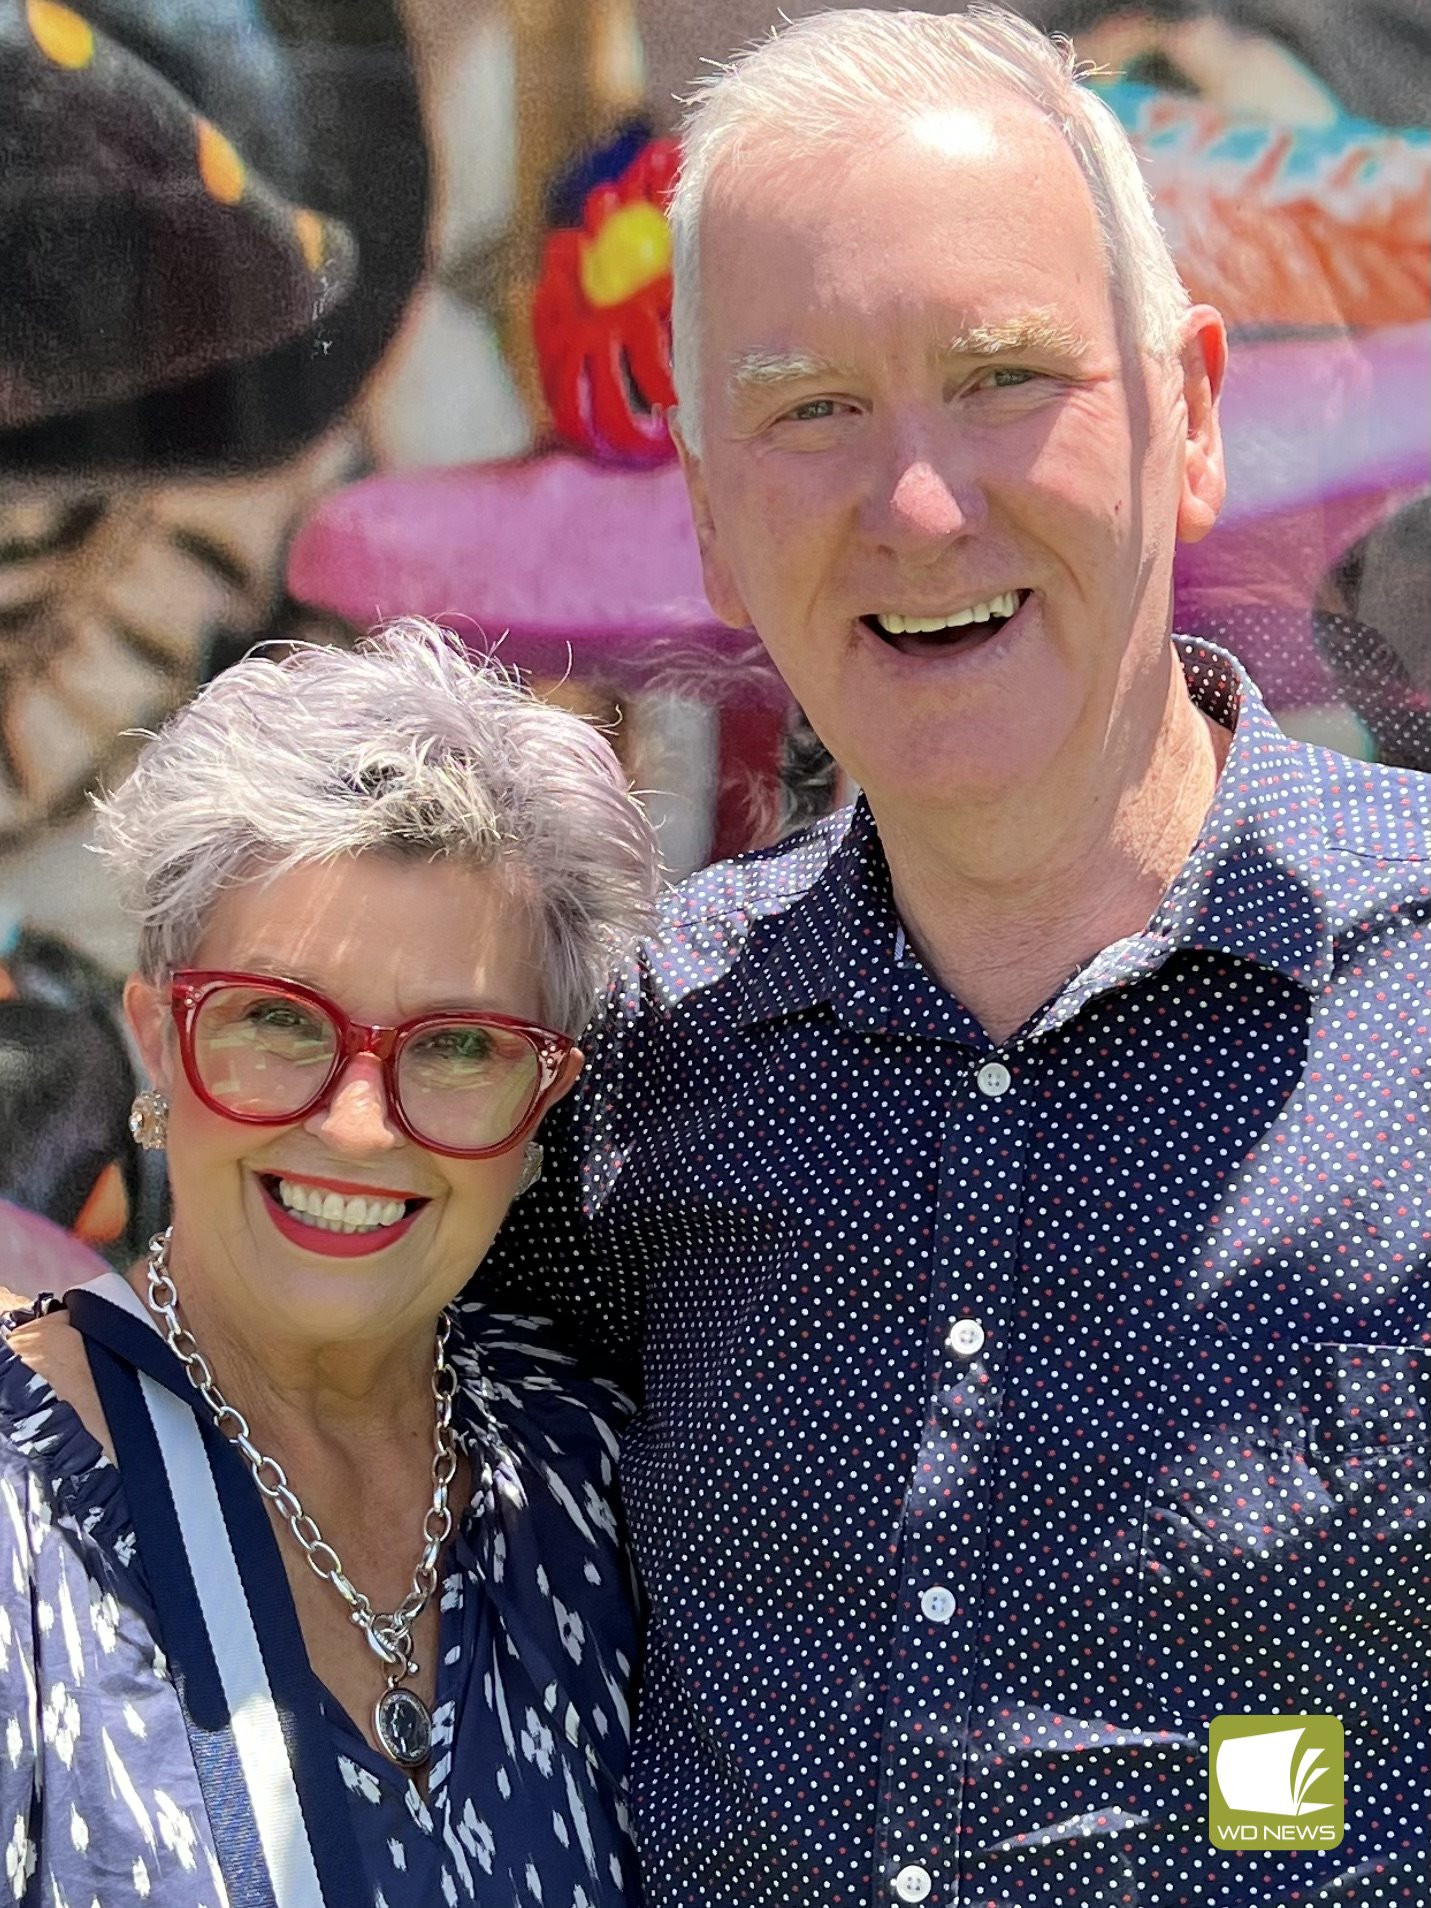 Local pride: Camperdown residents are basking in the glow of a Naracoorte couple’s positive review of the town in a viral post online.